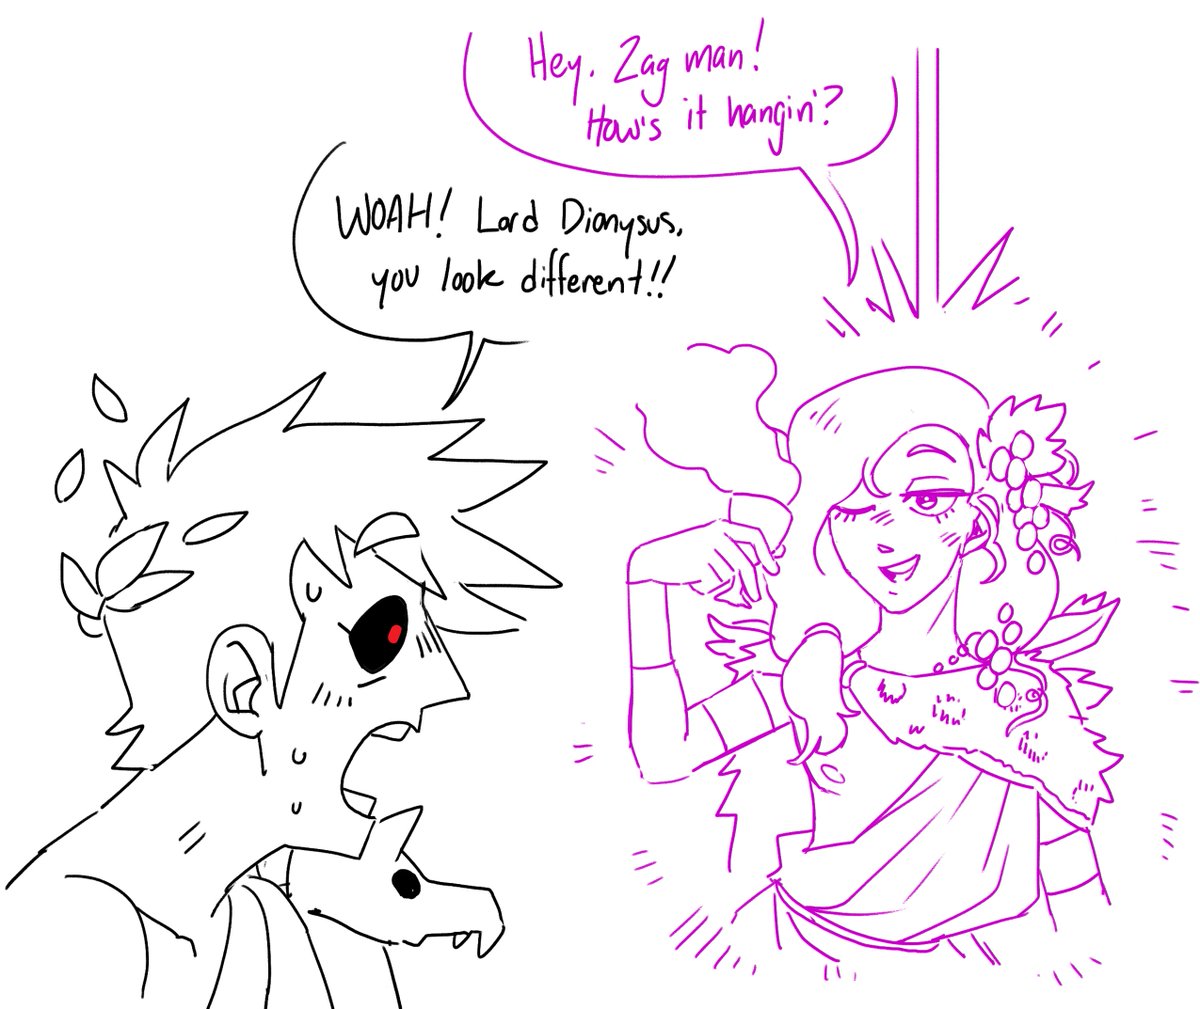 repost of an older hades doodle comic i did last year, dionysus is sometimes depicted as a slender young effeminate man. dionysus is gnc 